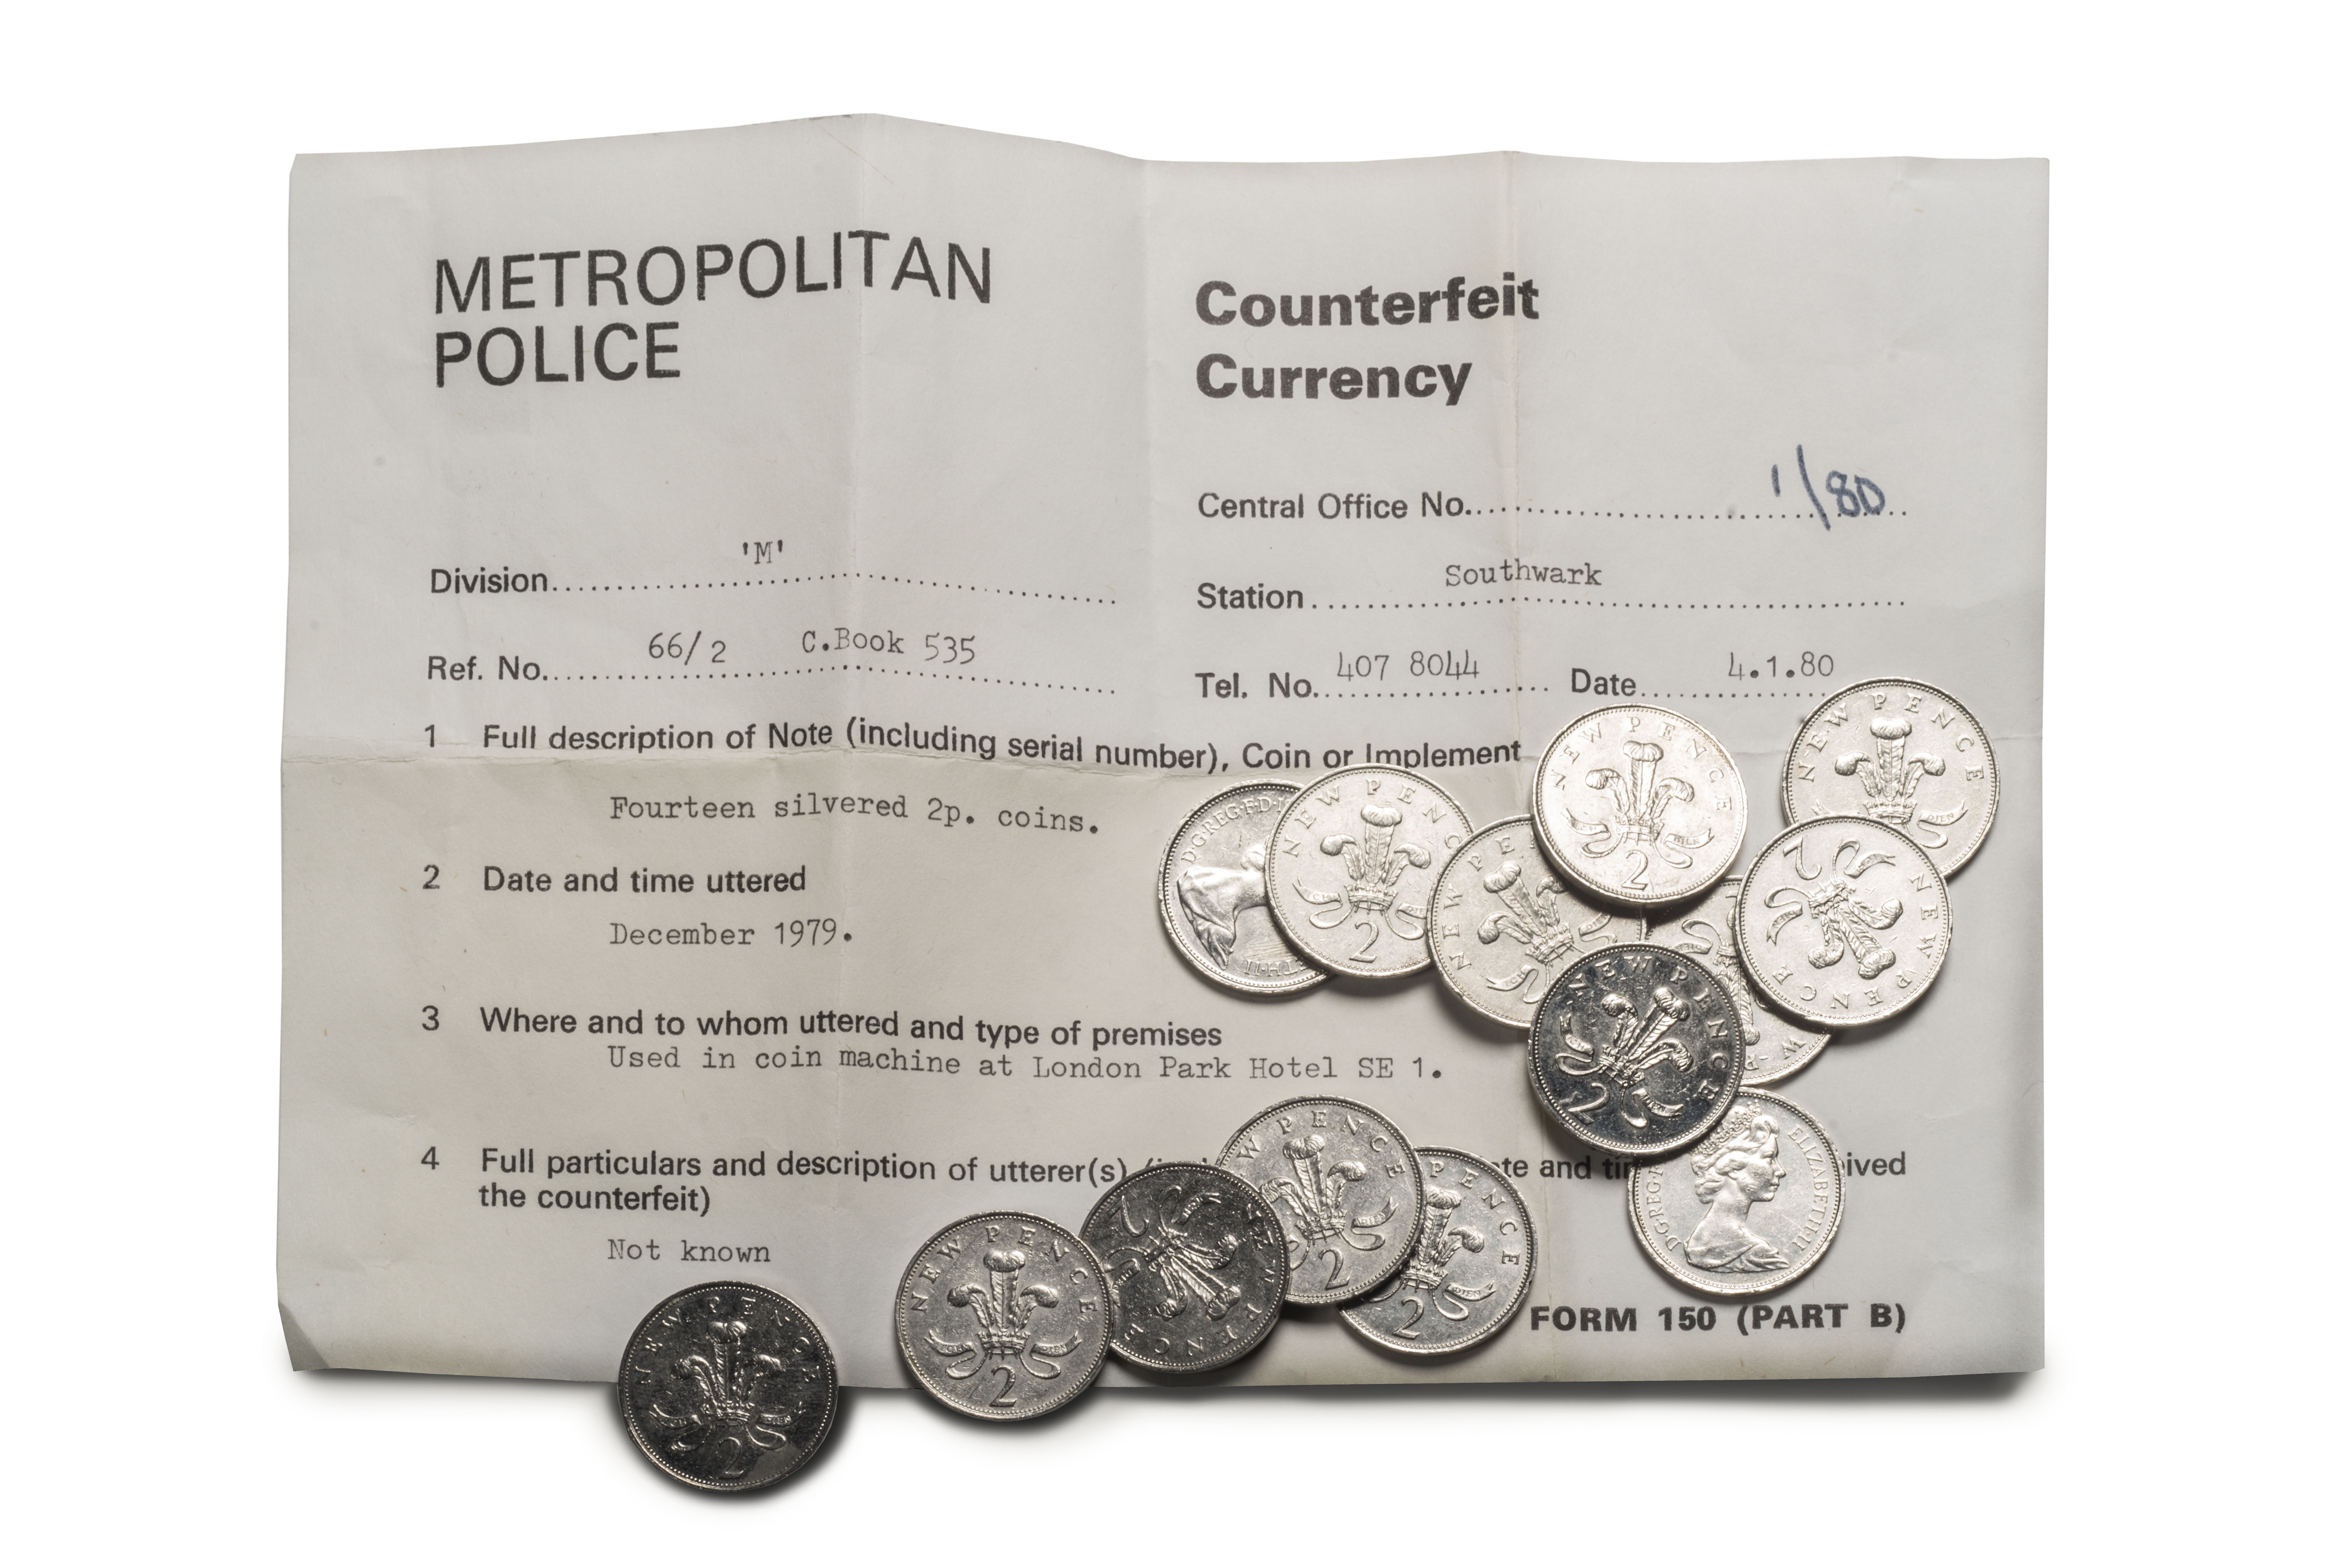 Fourteen counterfeit silvered 2p coins, 1979, recovered by the Metropolitan Police. © Museum of London / object courtesy the Metropolitan Police’s Crime Museum